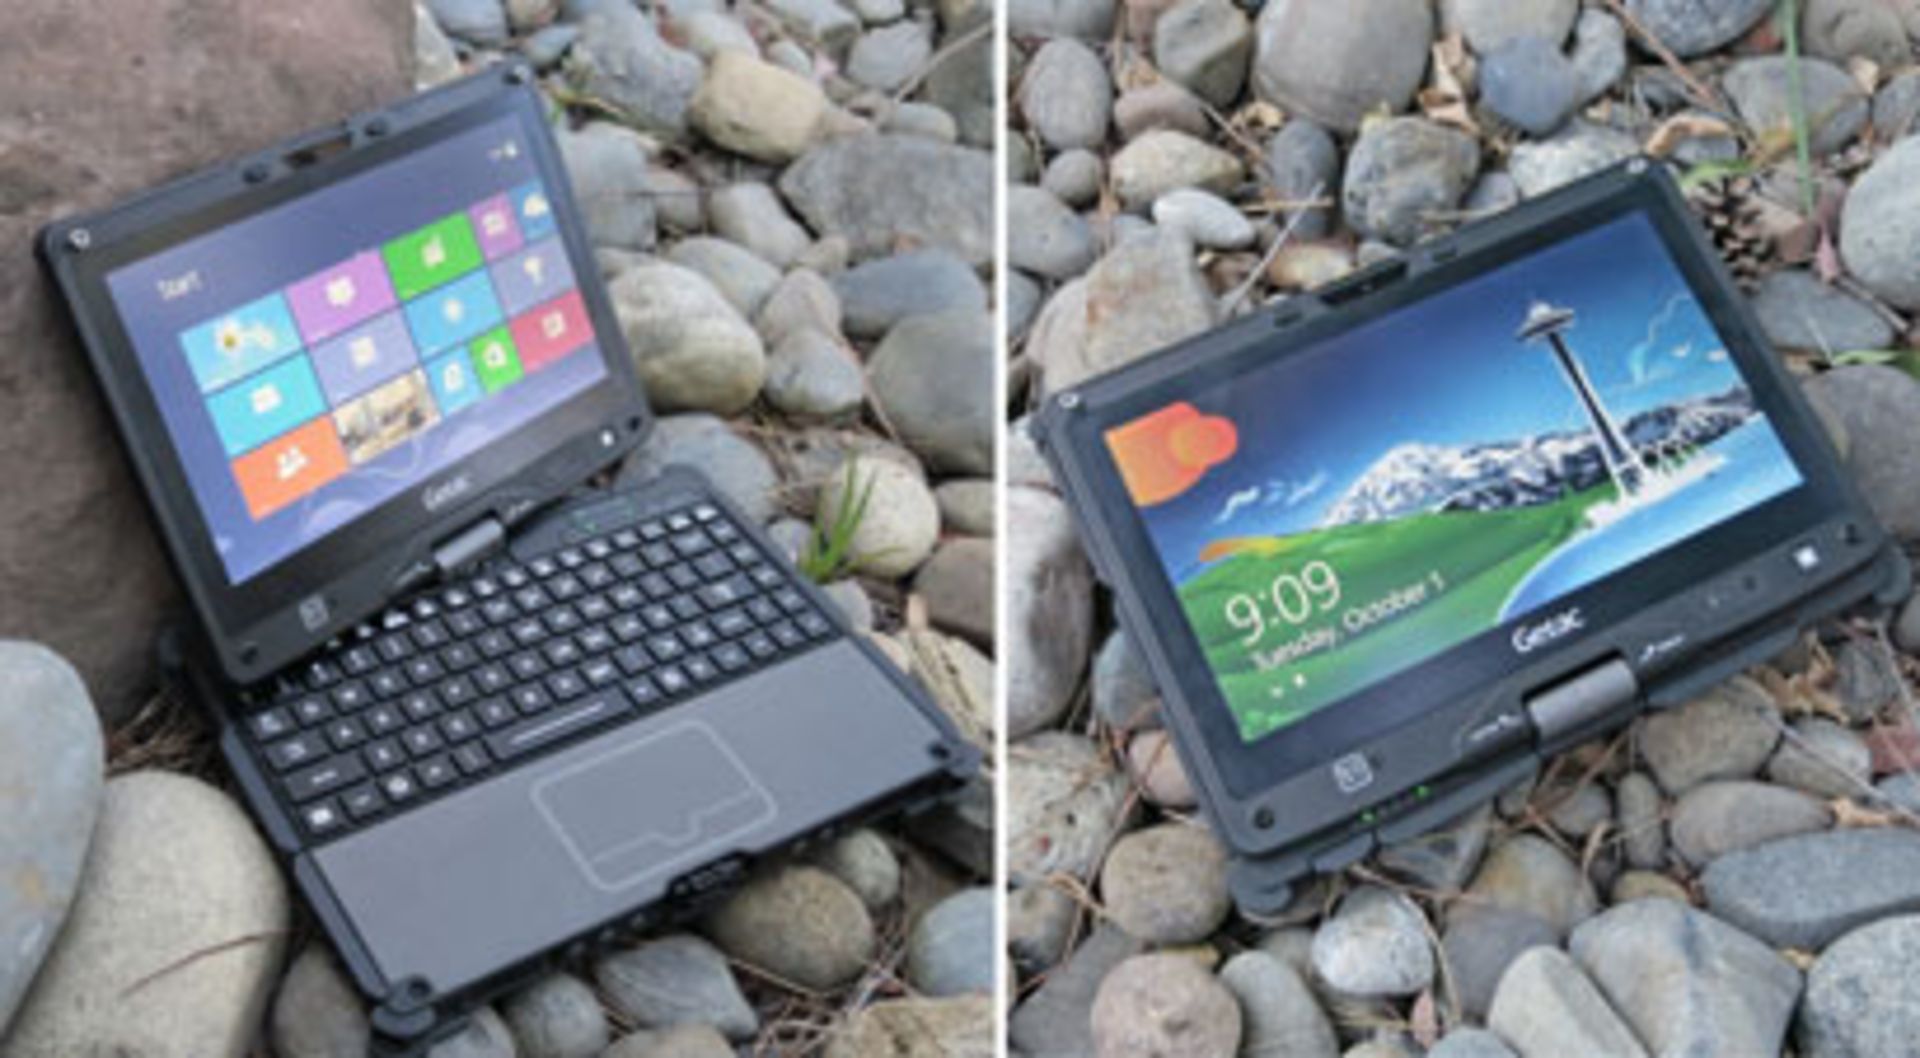 1 x Getac V200 Rugged Laptop Computer - Rugged Laptop That Transforms into a Tablet PC - Features an - Image 9 of 15